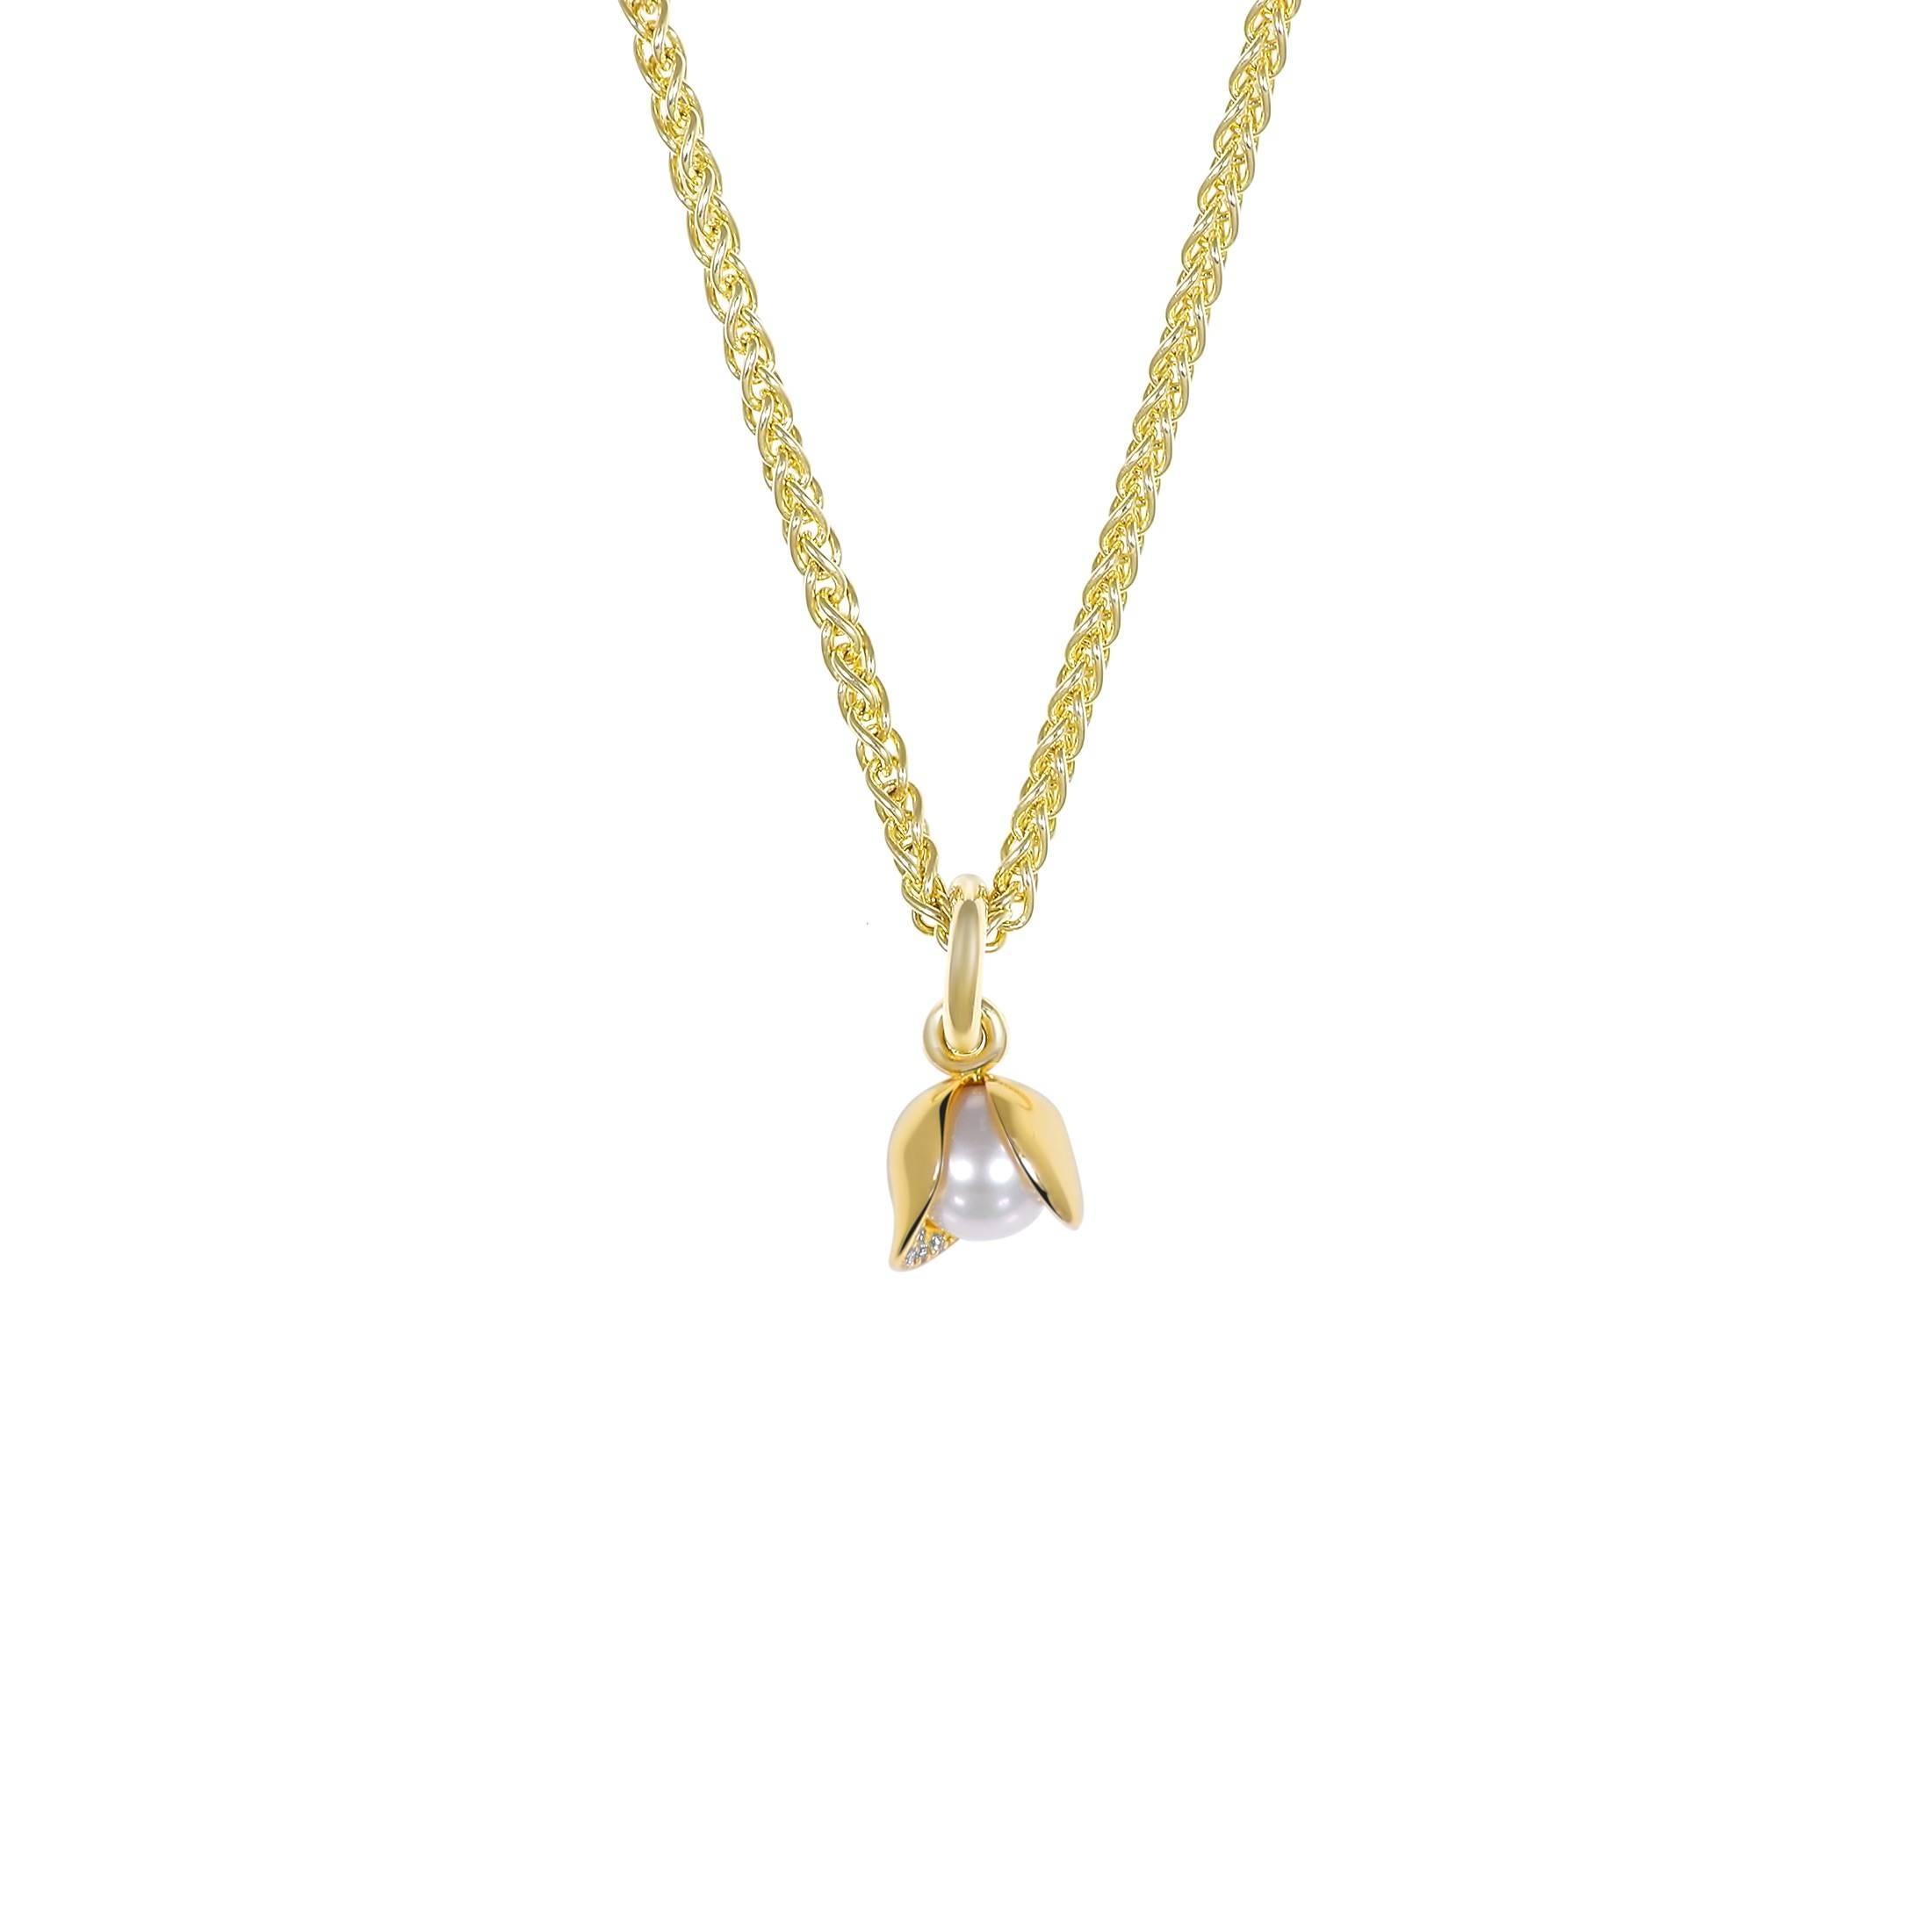 The Orchid Diamond Necklace is the perfect everyday luxe accessory. Subtle yet statement, its unique design brings a touch of sparkle to even the most casual of outfits. Handcrafted in 18k Fairtrade gold, this necklace features an 8 mm Akoya pearl